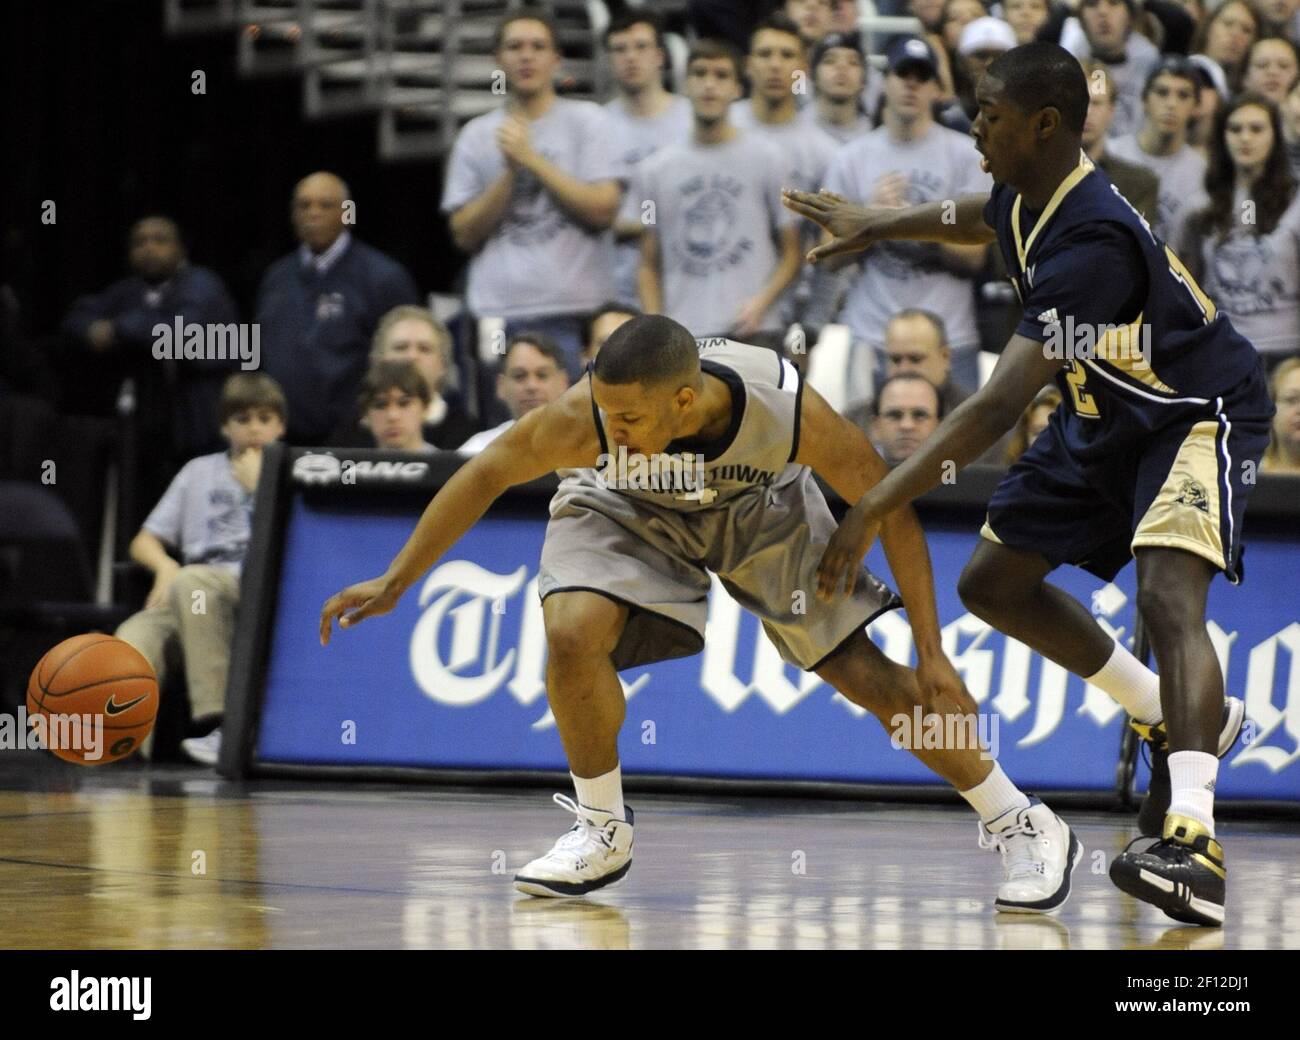 Georgetown guard Chris Wright (4) loses control of the ball while defended by Pittsburgh's Ashton Gibbs, right, during the first half at the Verizon Center in Washington, D.C., Saturday, January 3, 2009. Pitt defeated Georgetown, 70-54. (Photo by Chuck Myers/MCT/Sipa USA) Stock Photo